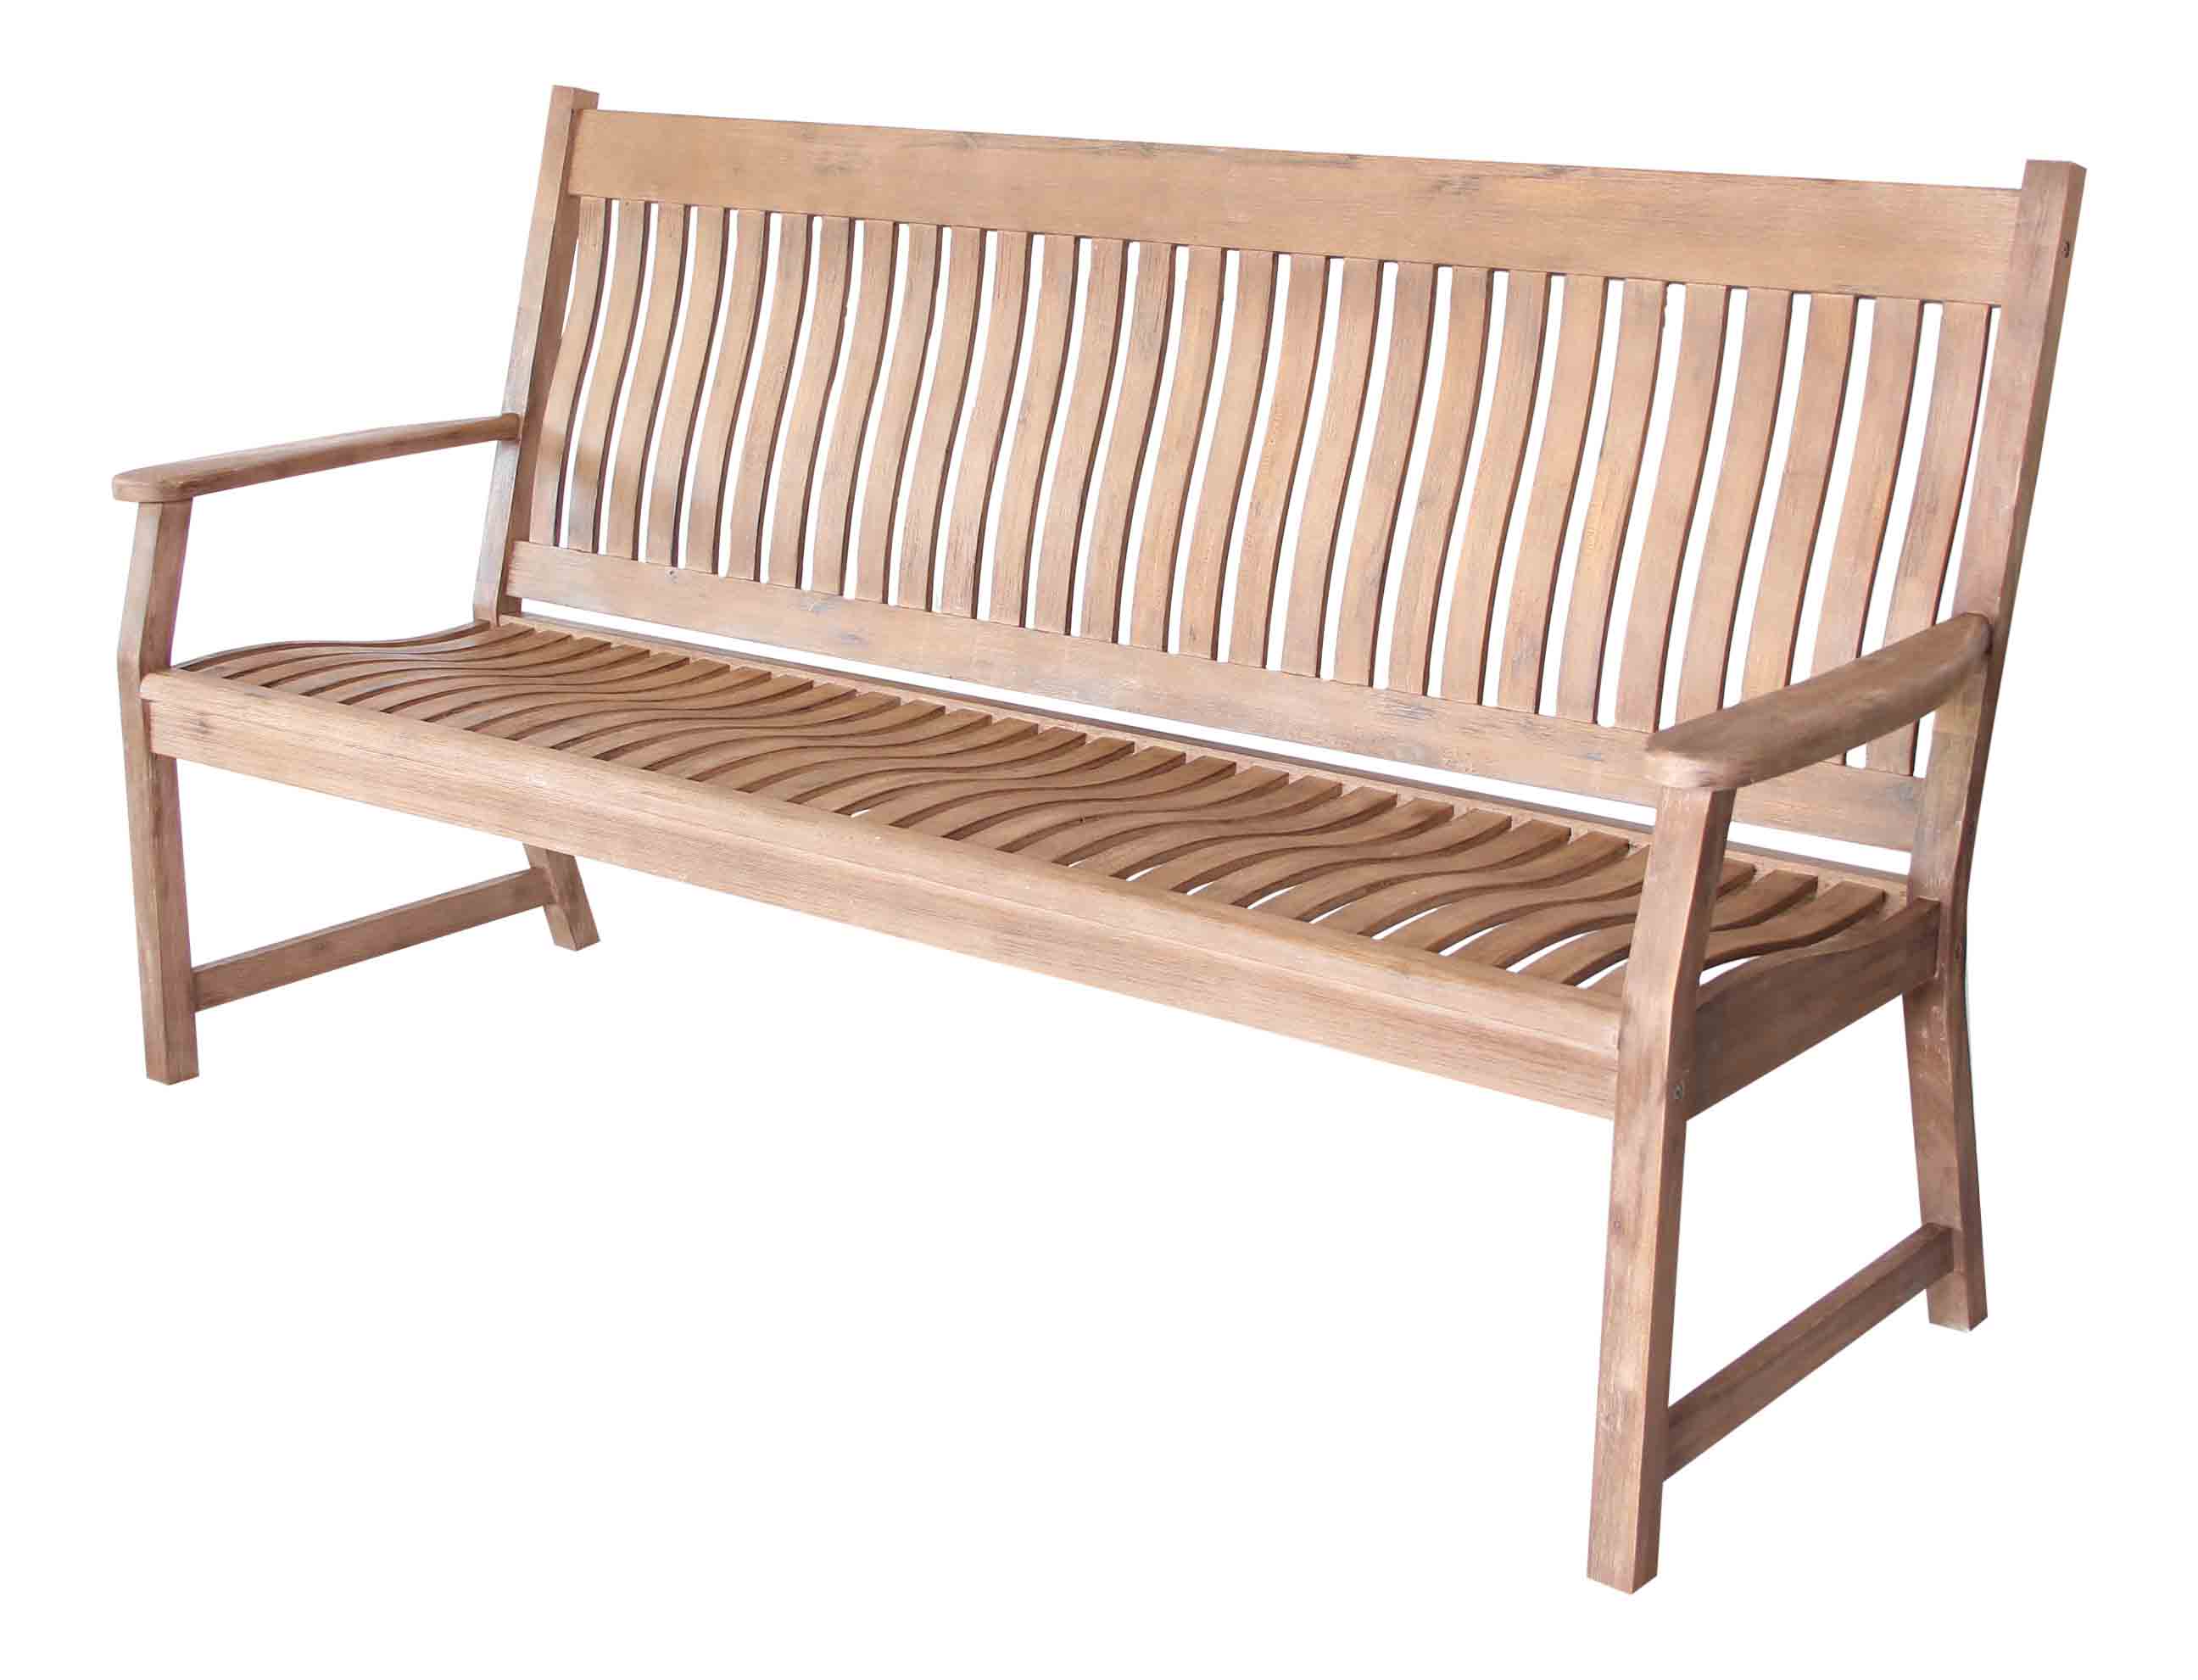 LG Outdoor Hanoi 3 Seat Curved Back Bench Natural